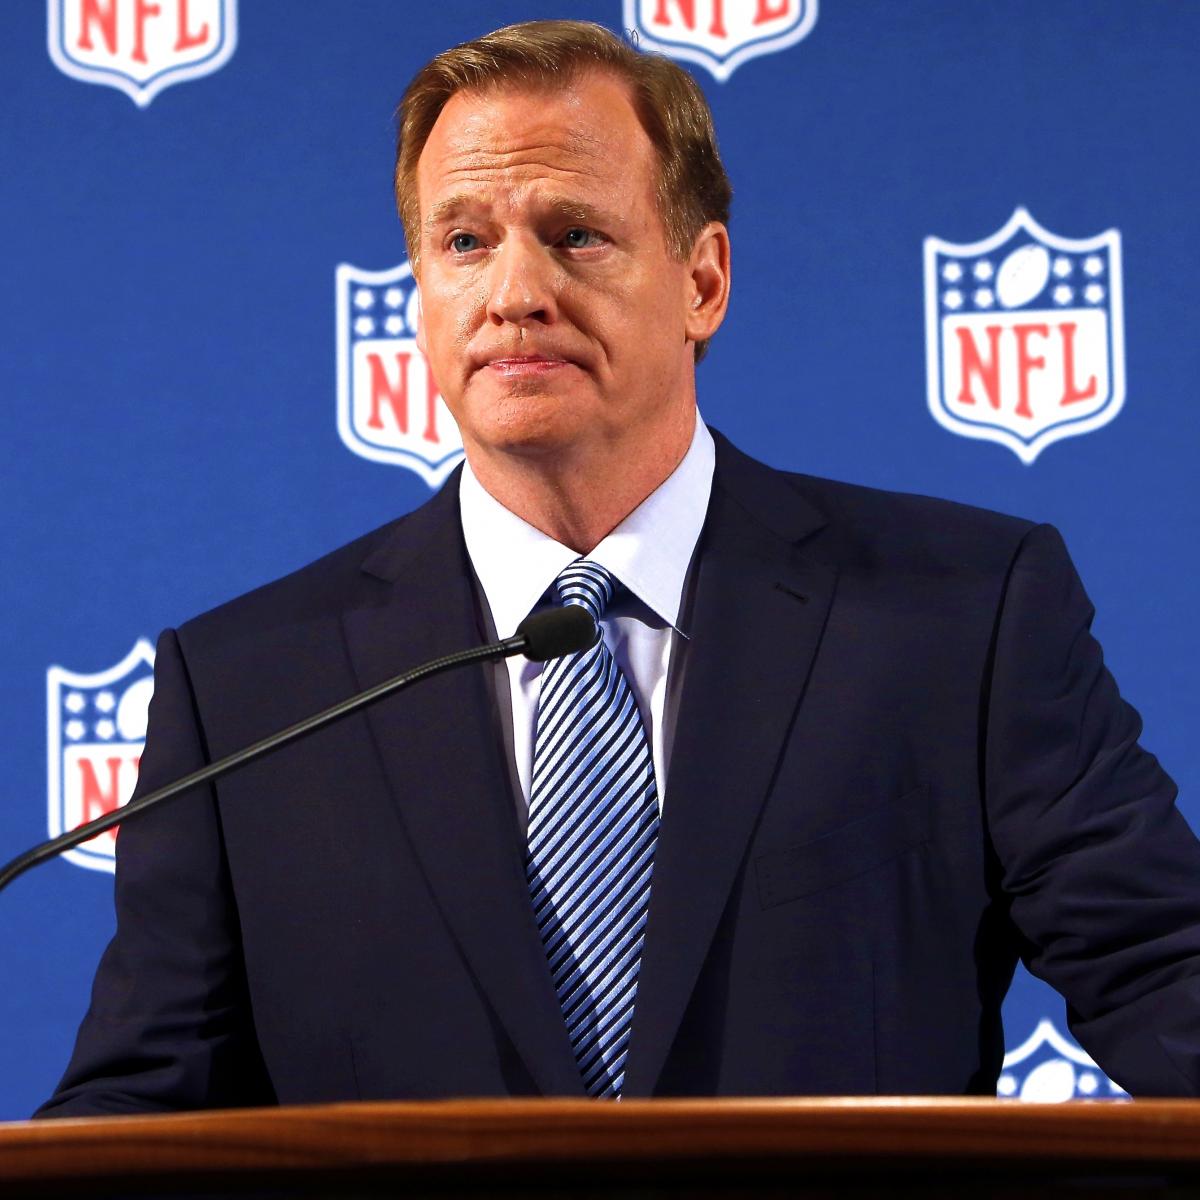 NFL Owners Approve New PersonalConduct Policy Latest Details and